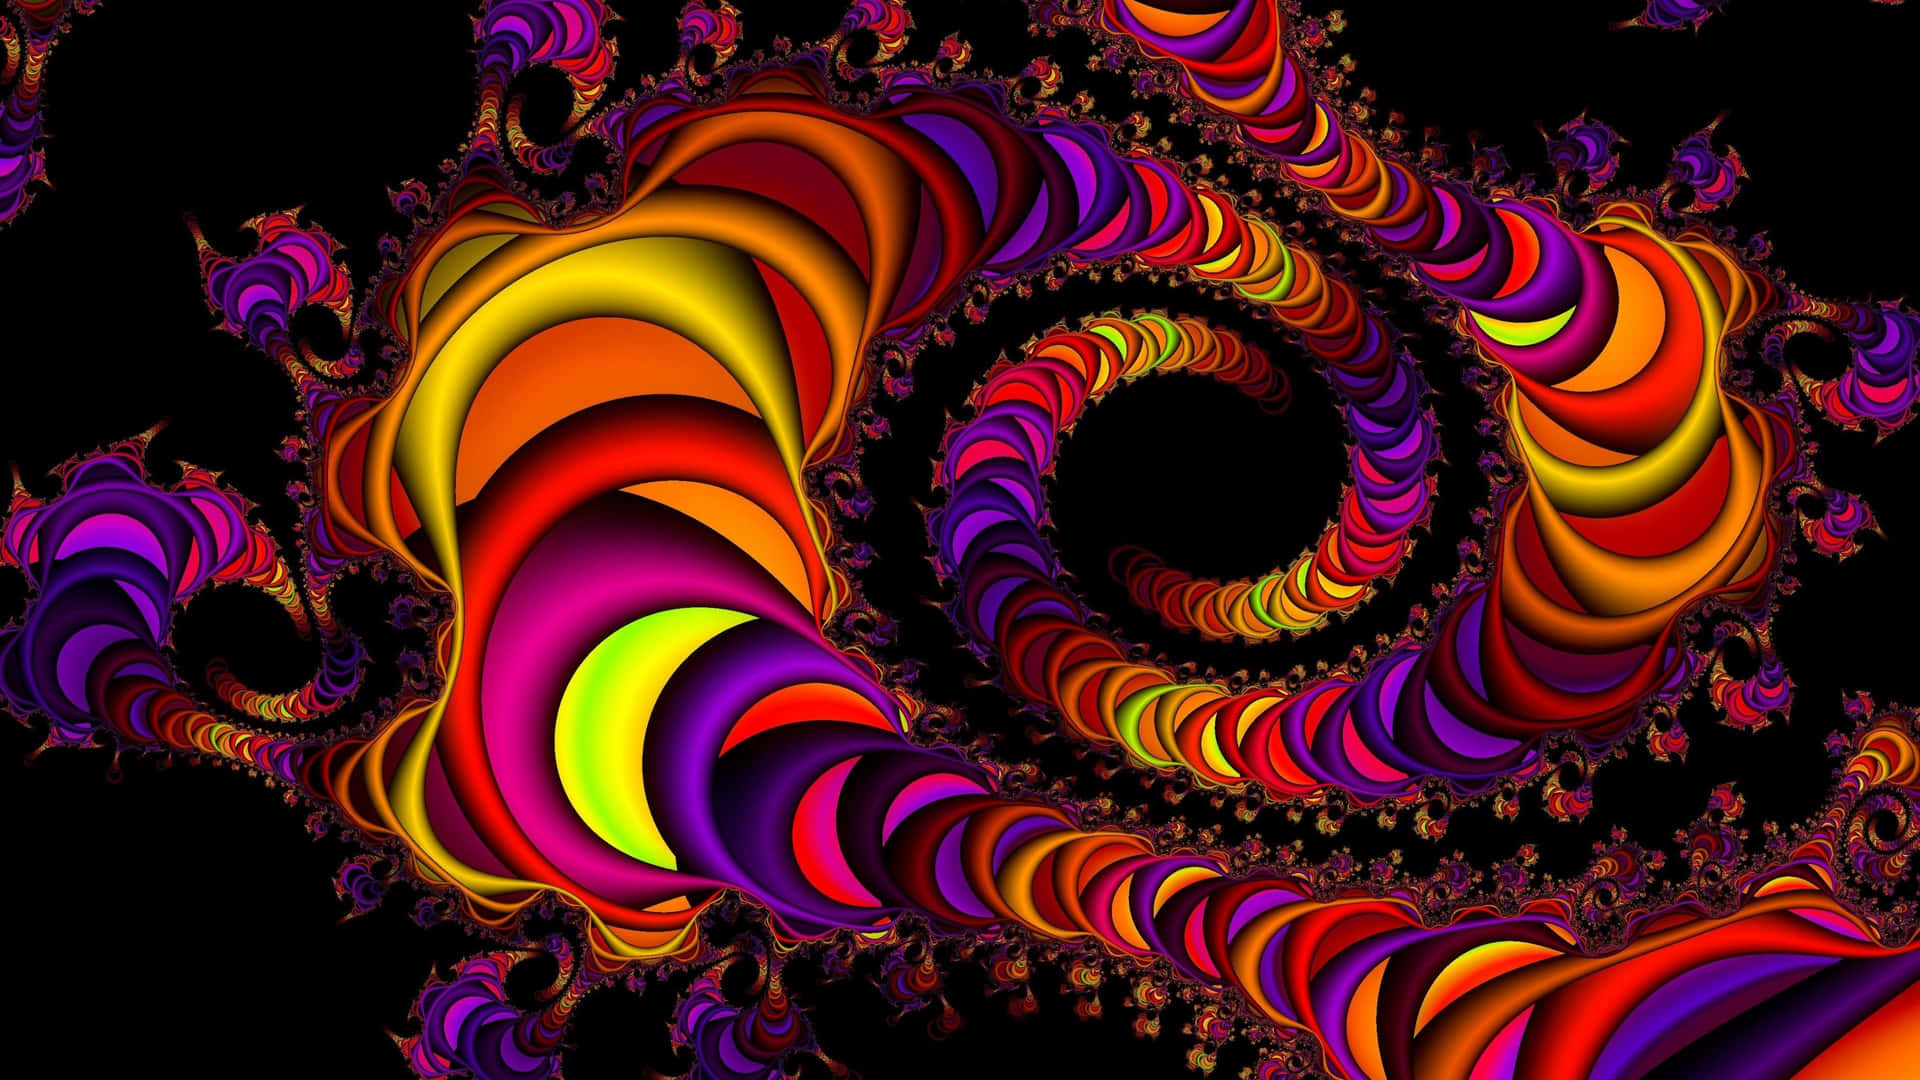 A kaleidoscope of color, featuring abstract fractal shapes Wallpaper